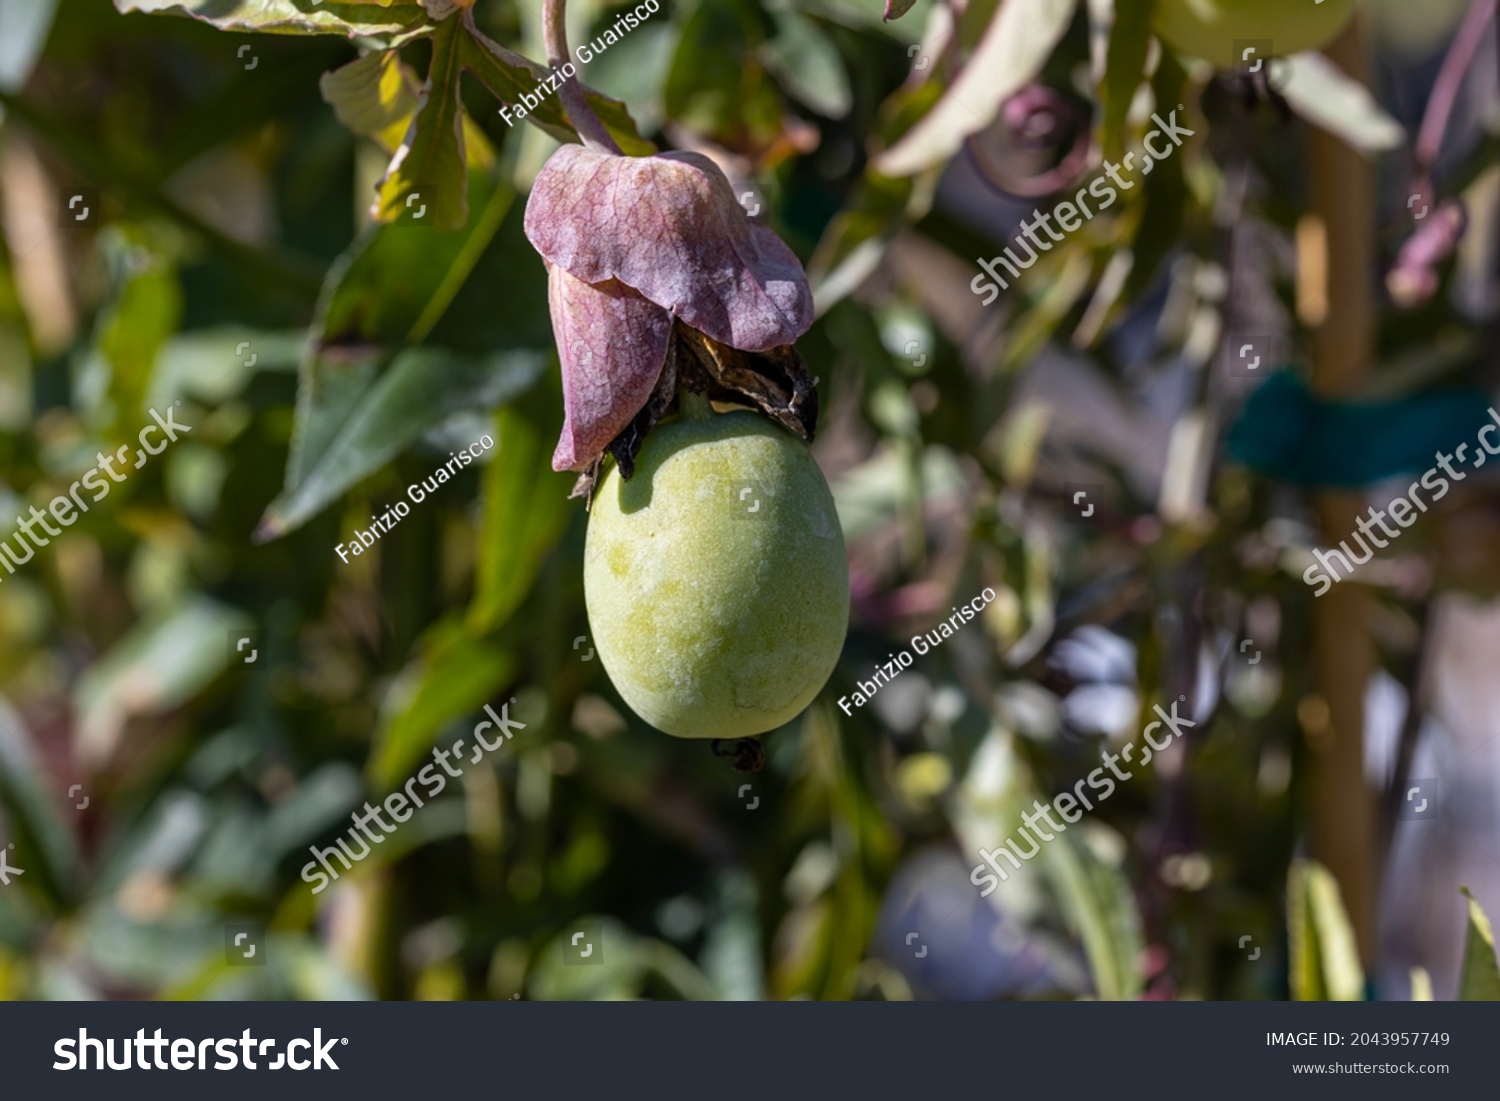 Unripe fruit of Passiflora. This plant's fruit is called passion fruit. The fruits are edible and the size depend upon the species or cultivar. #2043957749